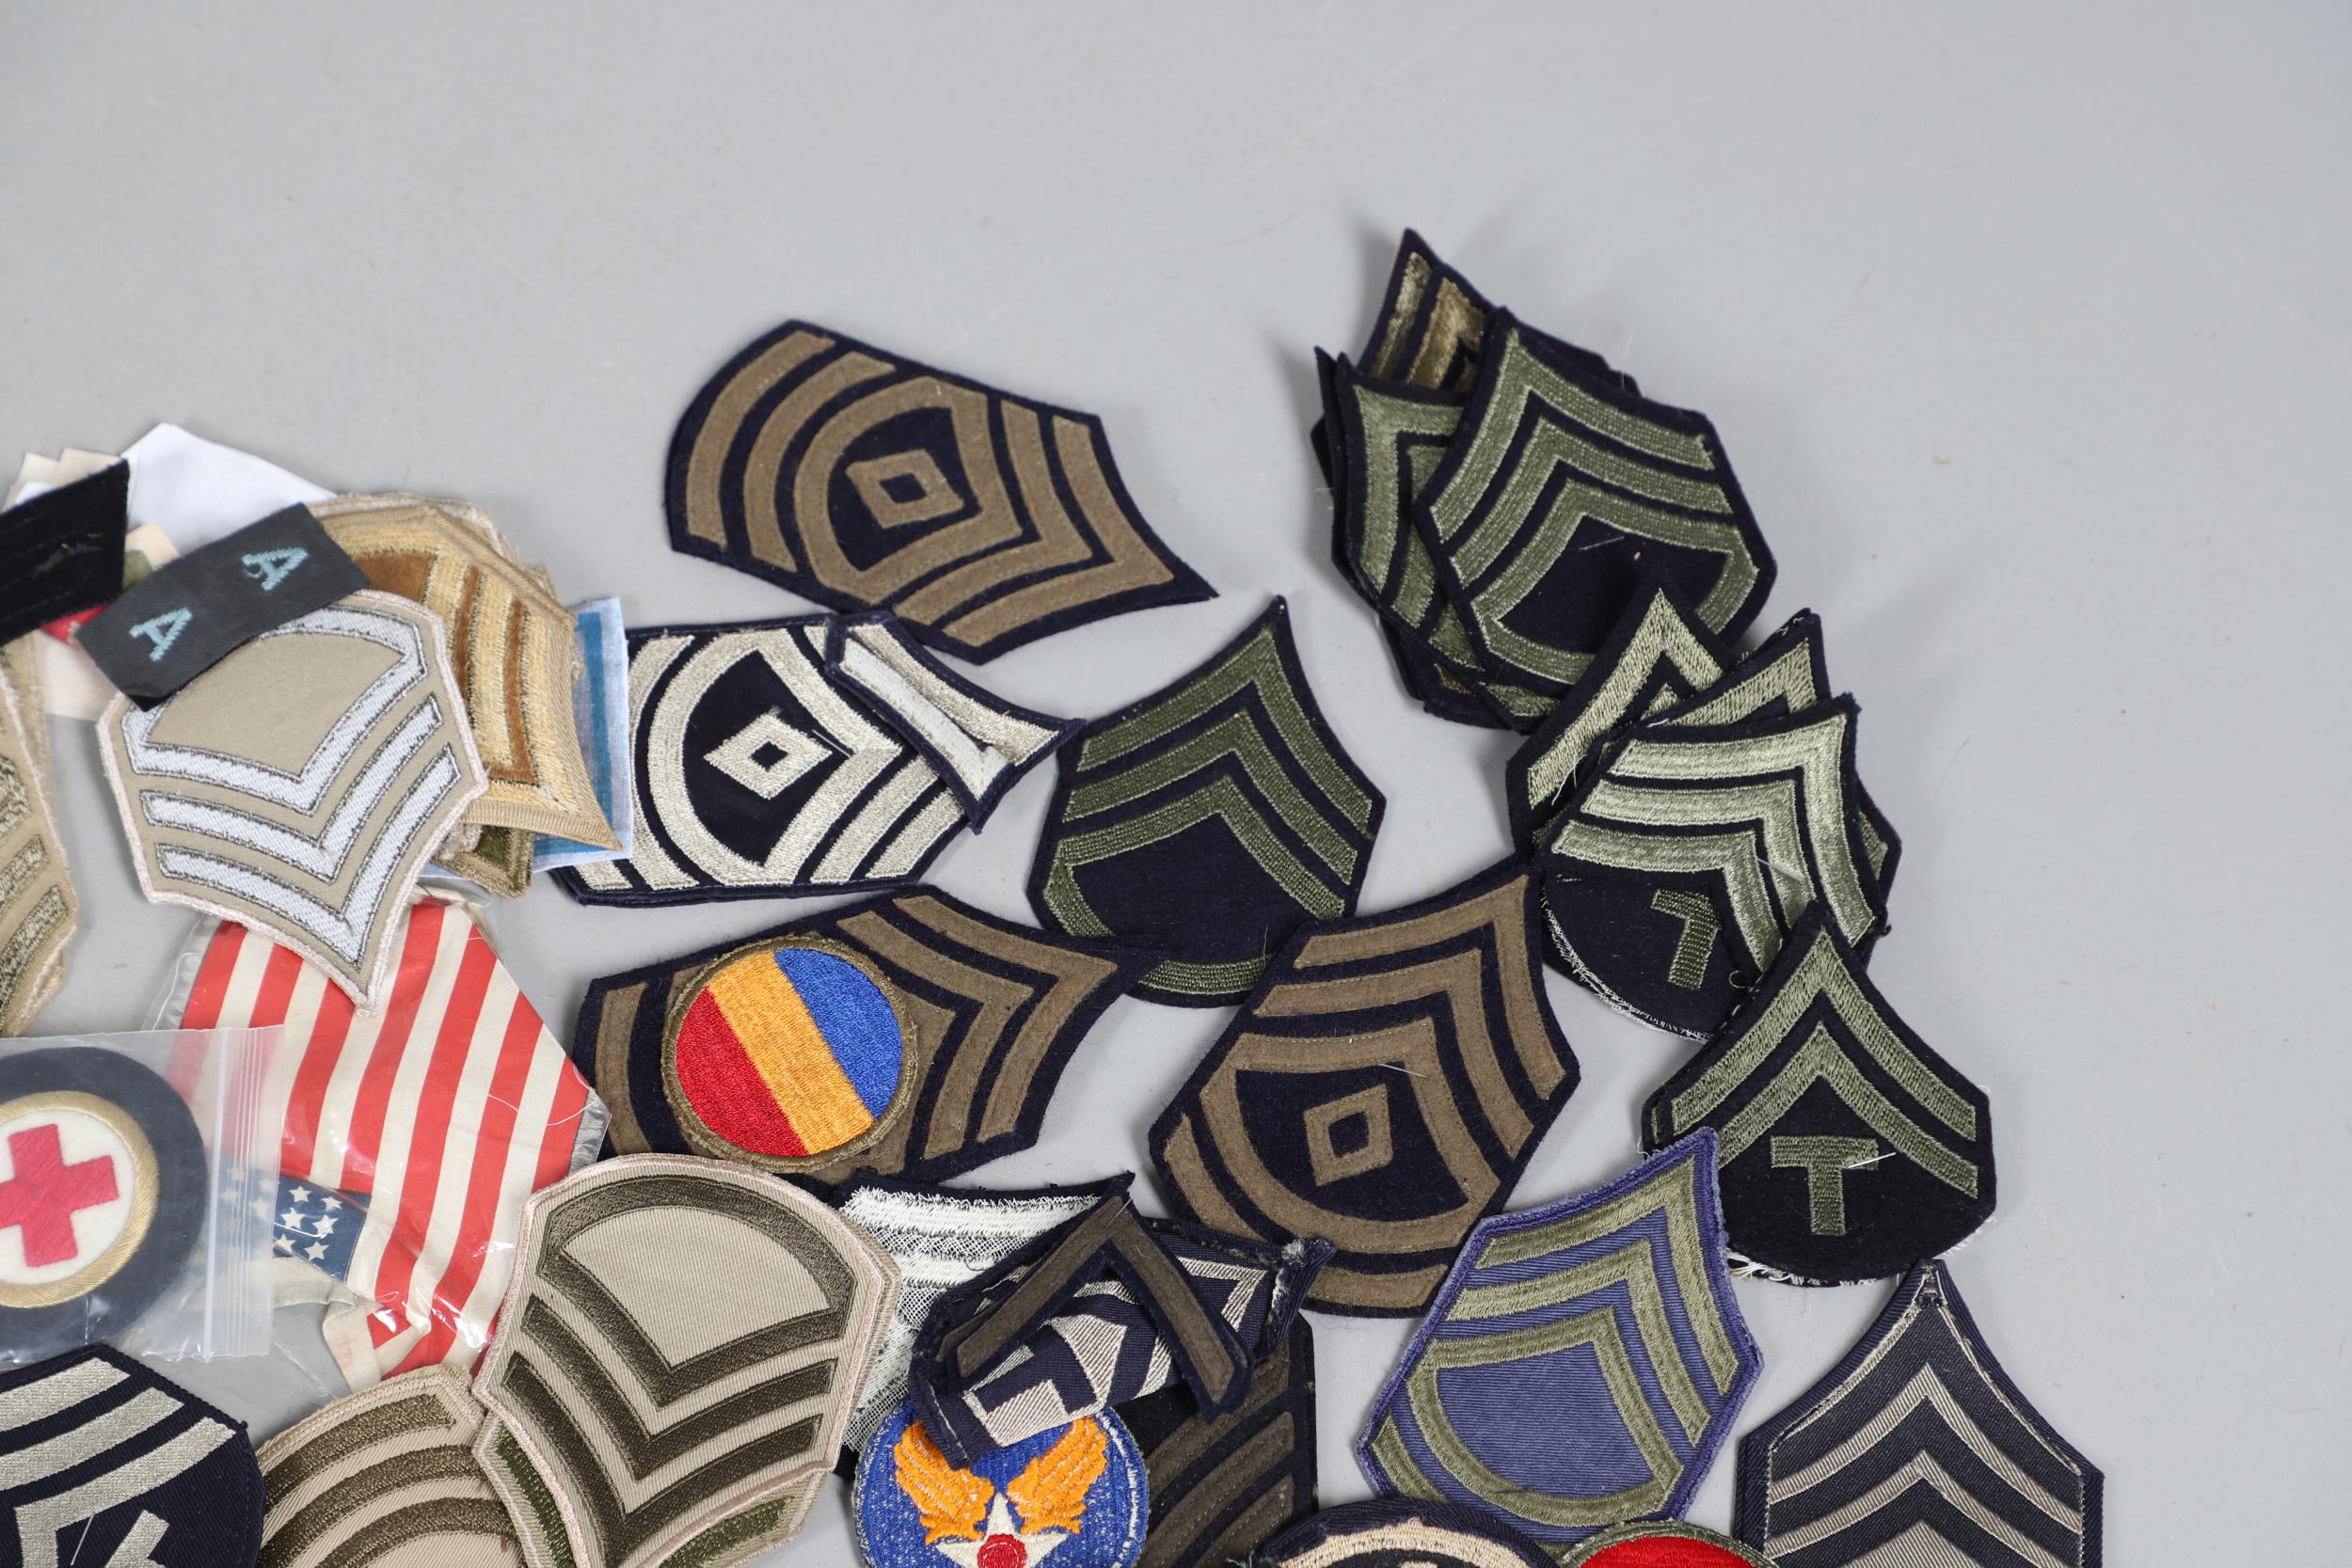 AN EXTENSIVE COLLECTION OF ARMY AND AIR FORCE UNIFORM PATCHES AND RANK INSIGNIA. - Image 2 of 14